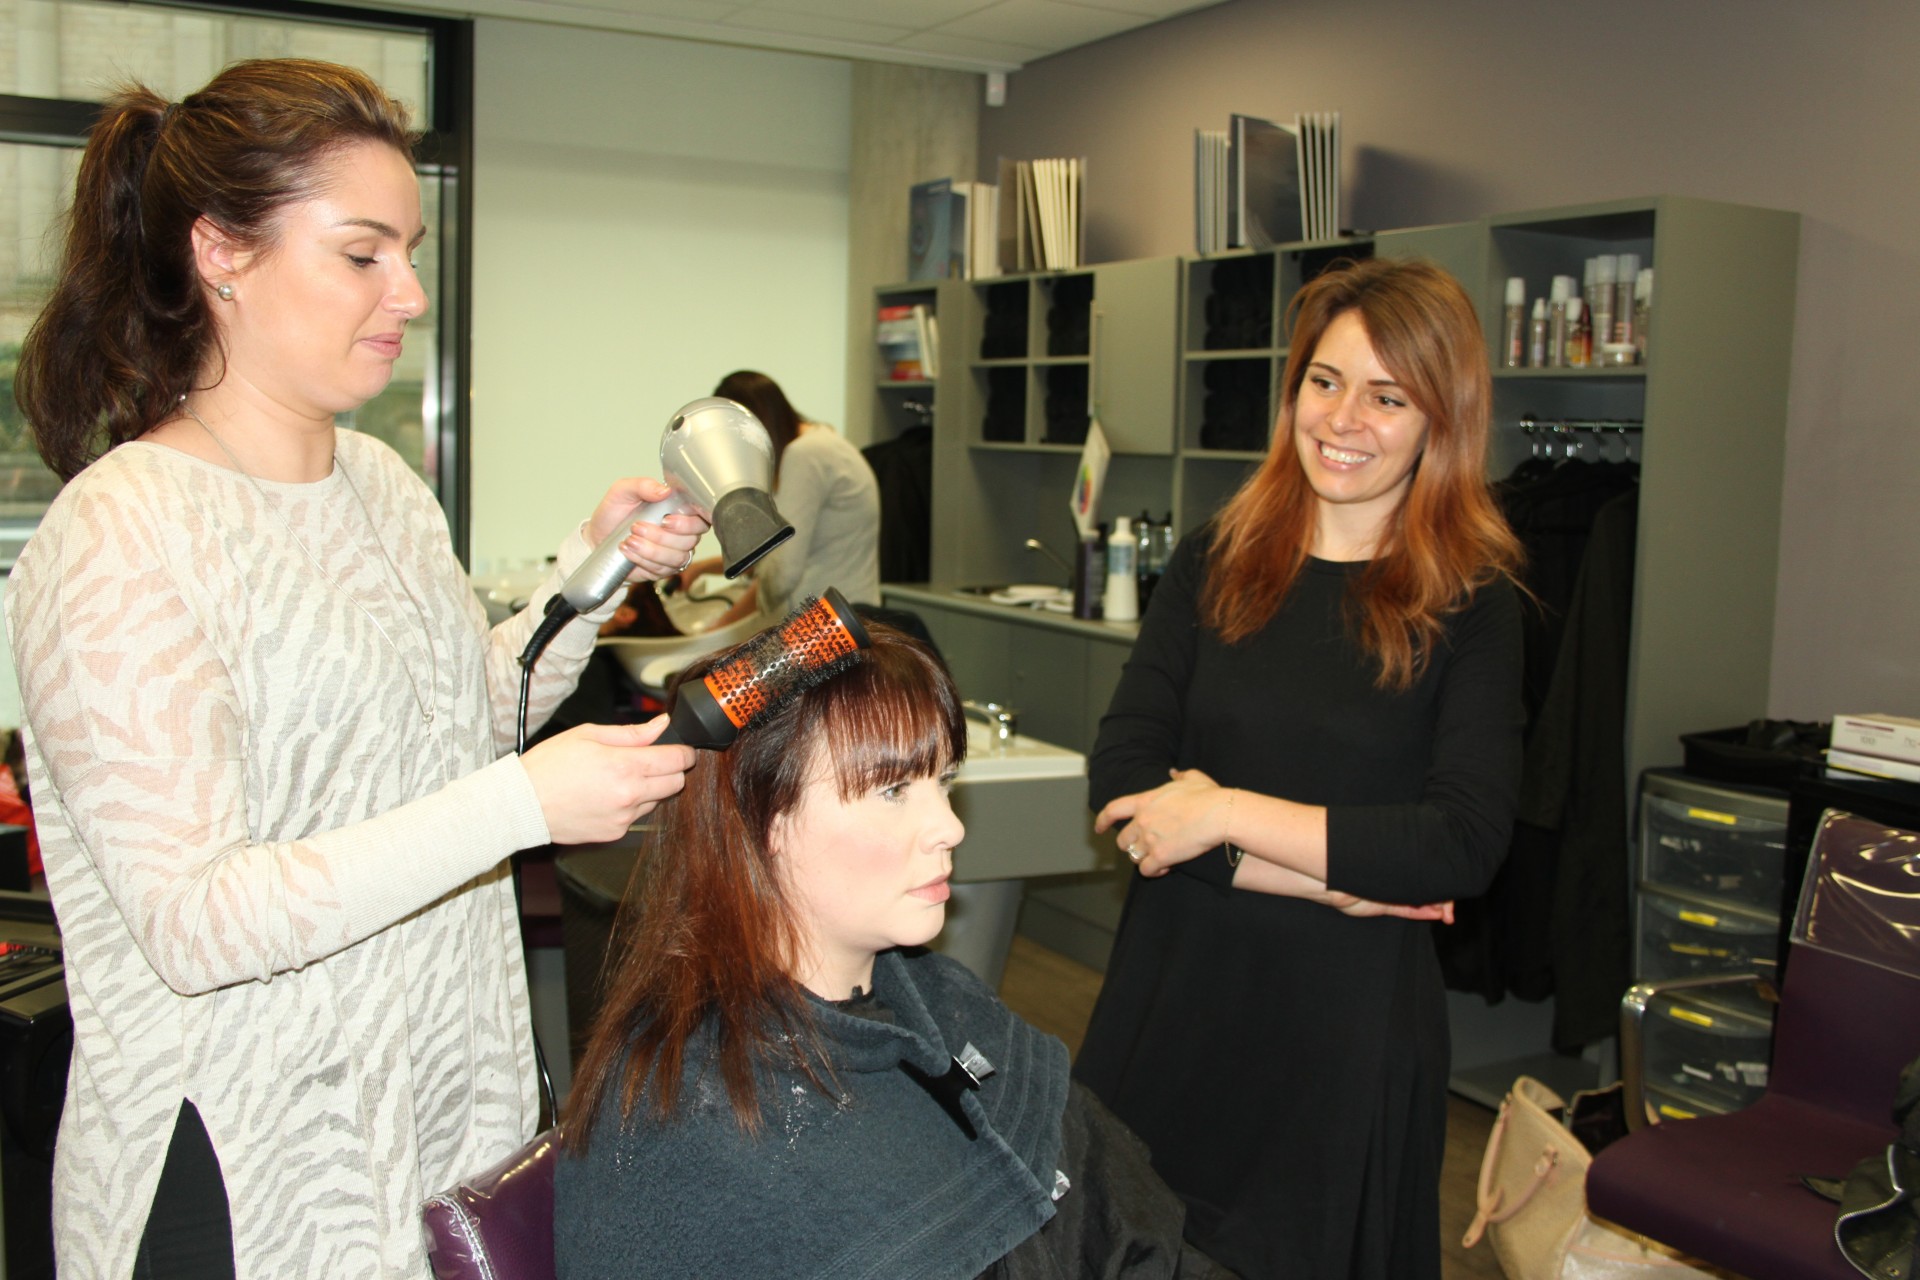 Chelsea Larkin of Precious Hair and Beauty Lounge styles her business partner and Natalie Dewhirst’s hair, watched by Amy Sontae of Wella.